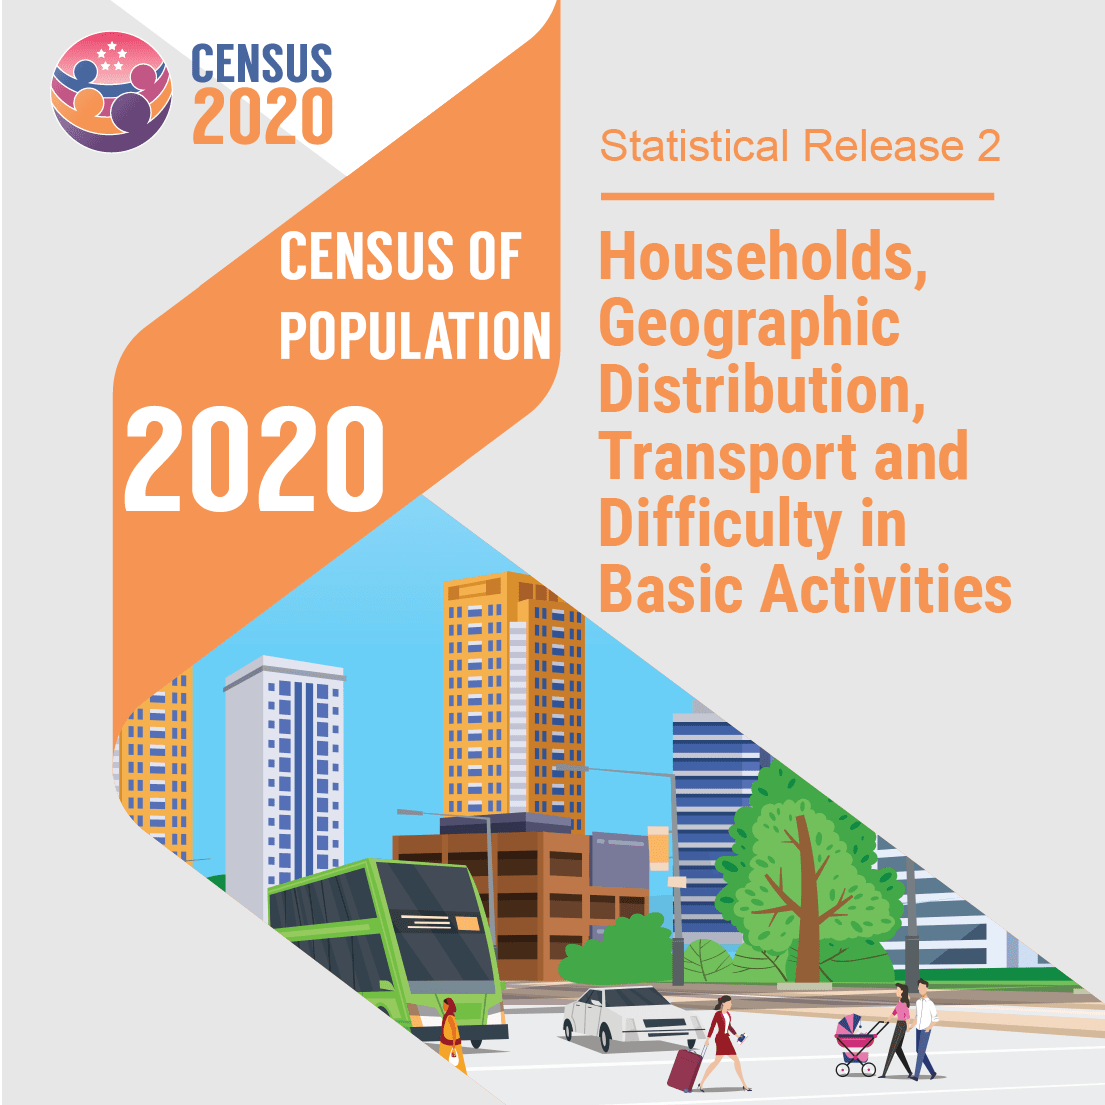 Census of Population 2020 - Statistical Release 2